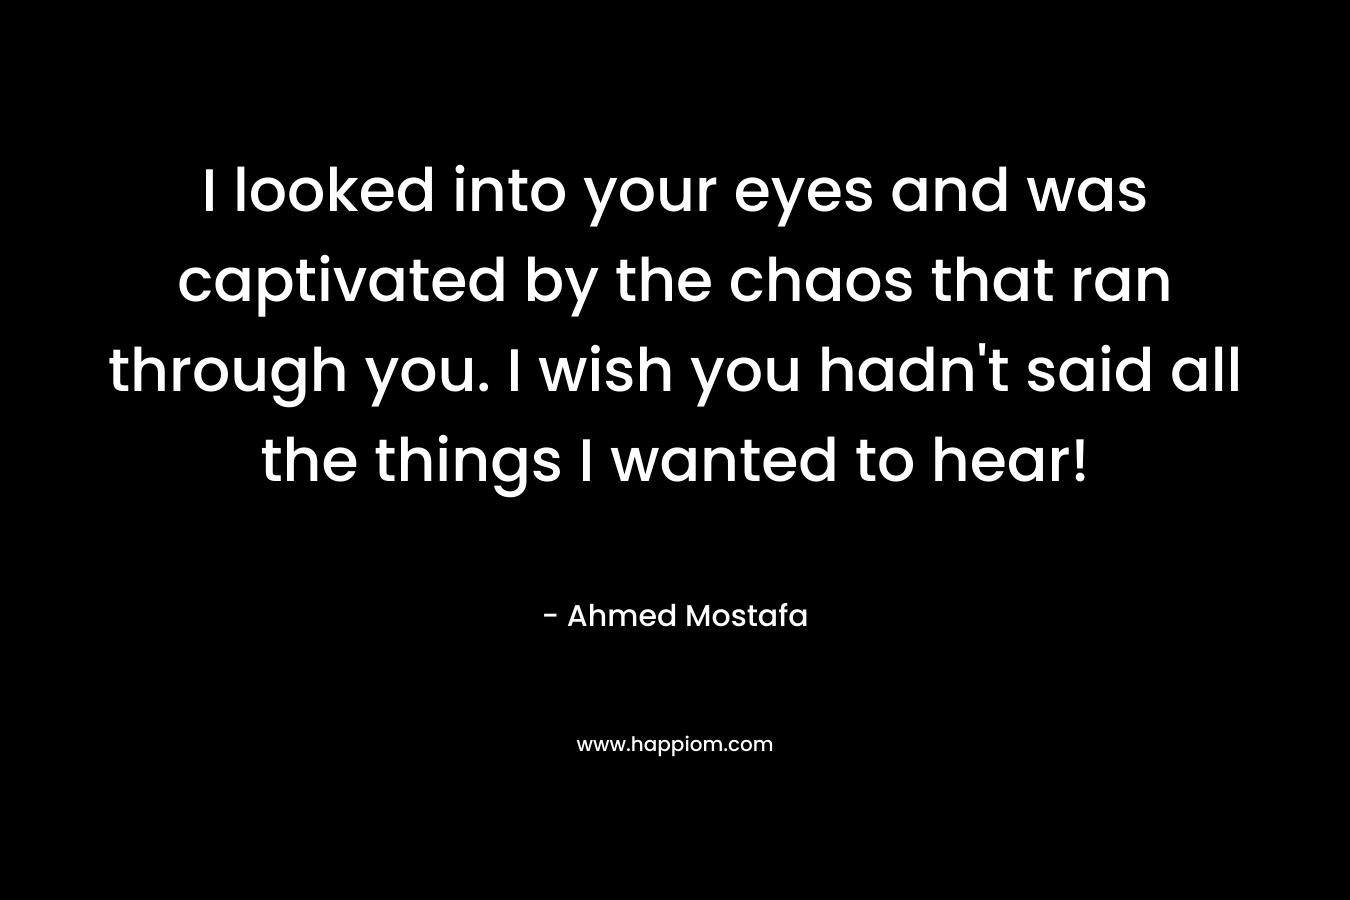 I looked into your eyes and was captivated by the chaos that ran through you. I wish you hadn’t said all the things I wanted to hear! – Ahmed Mostafa